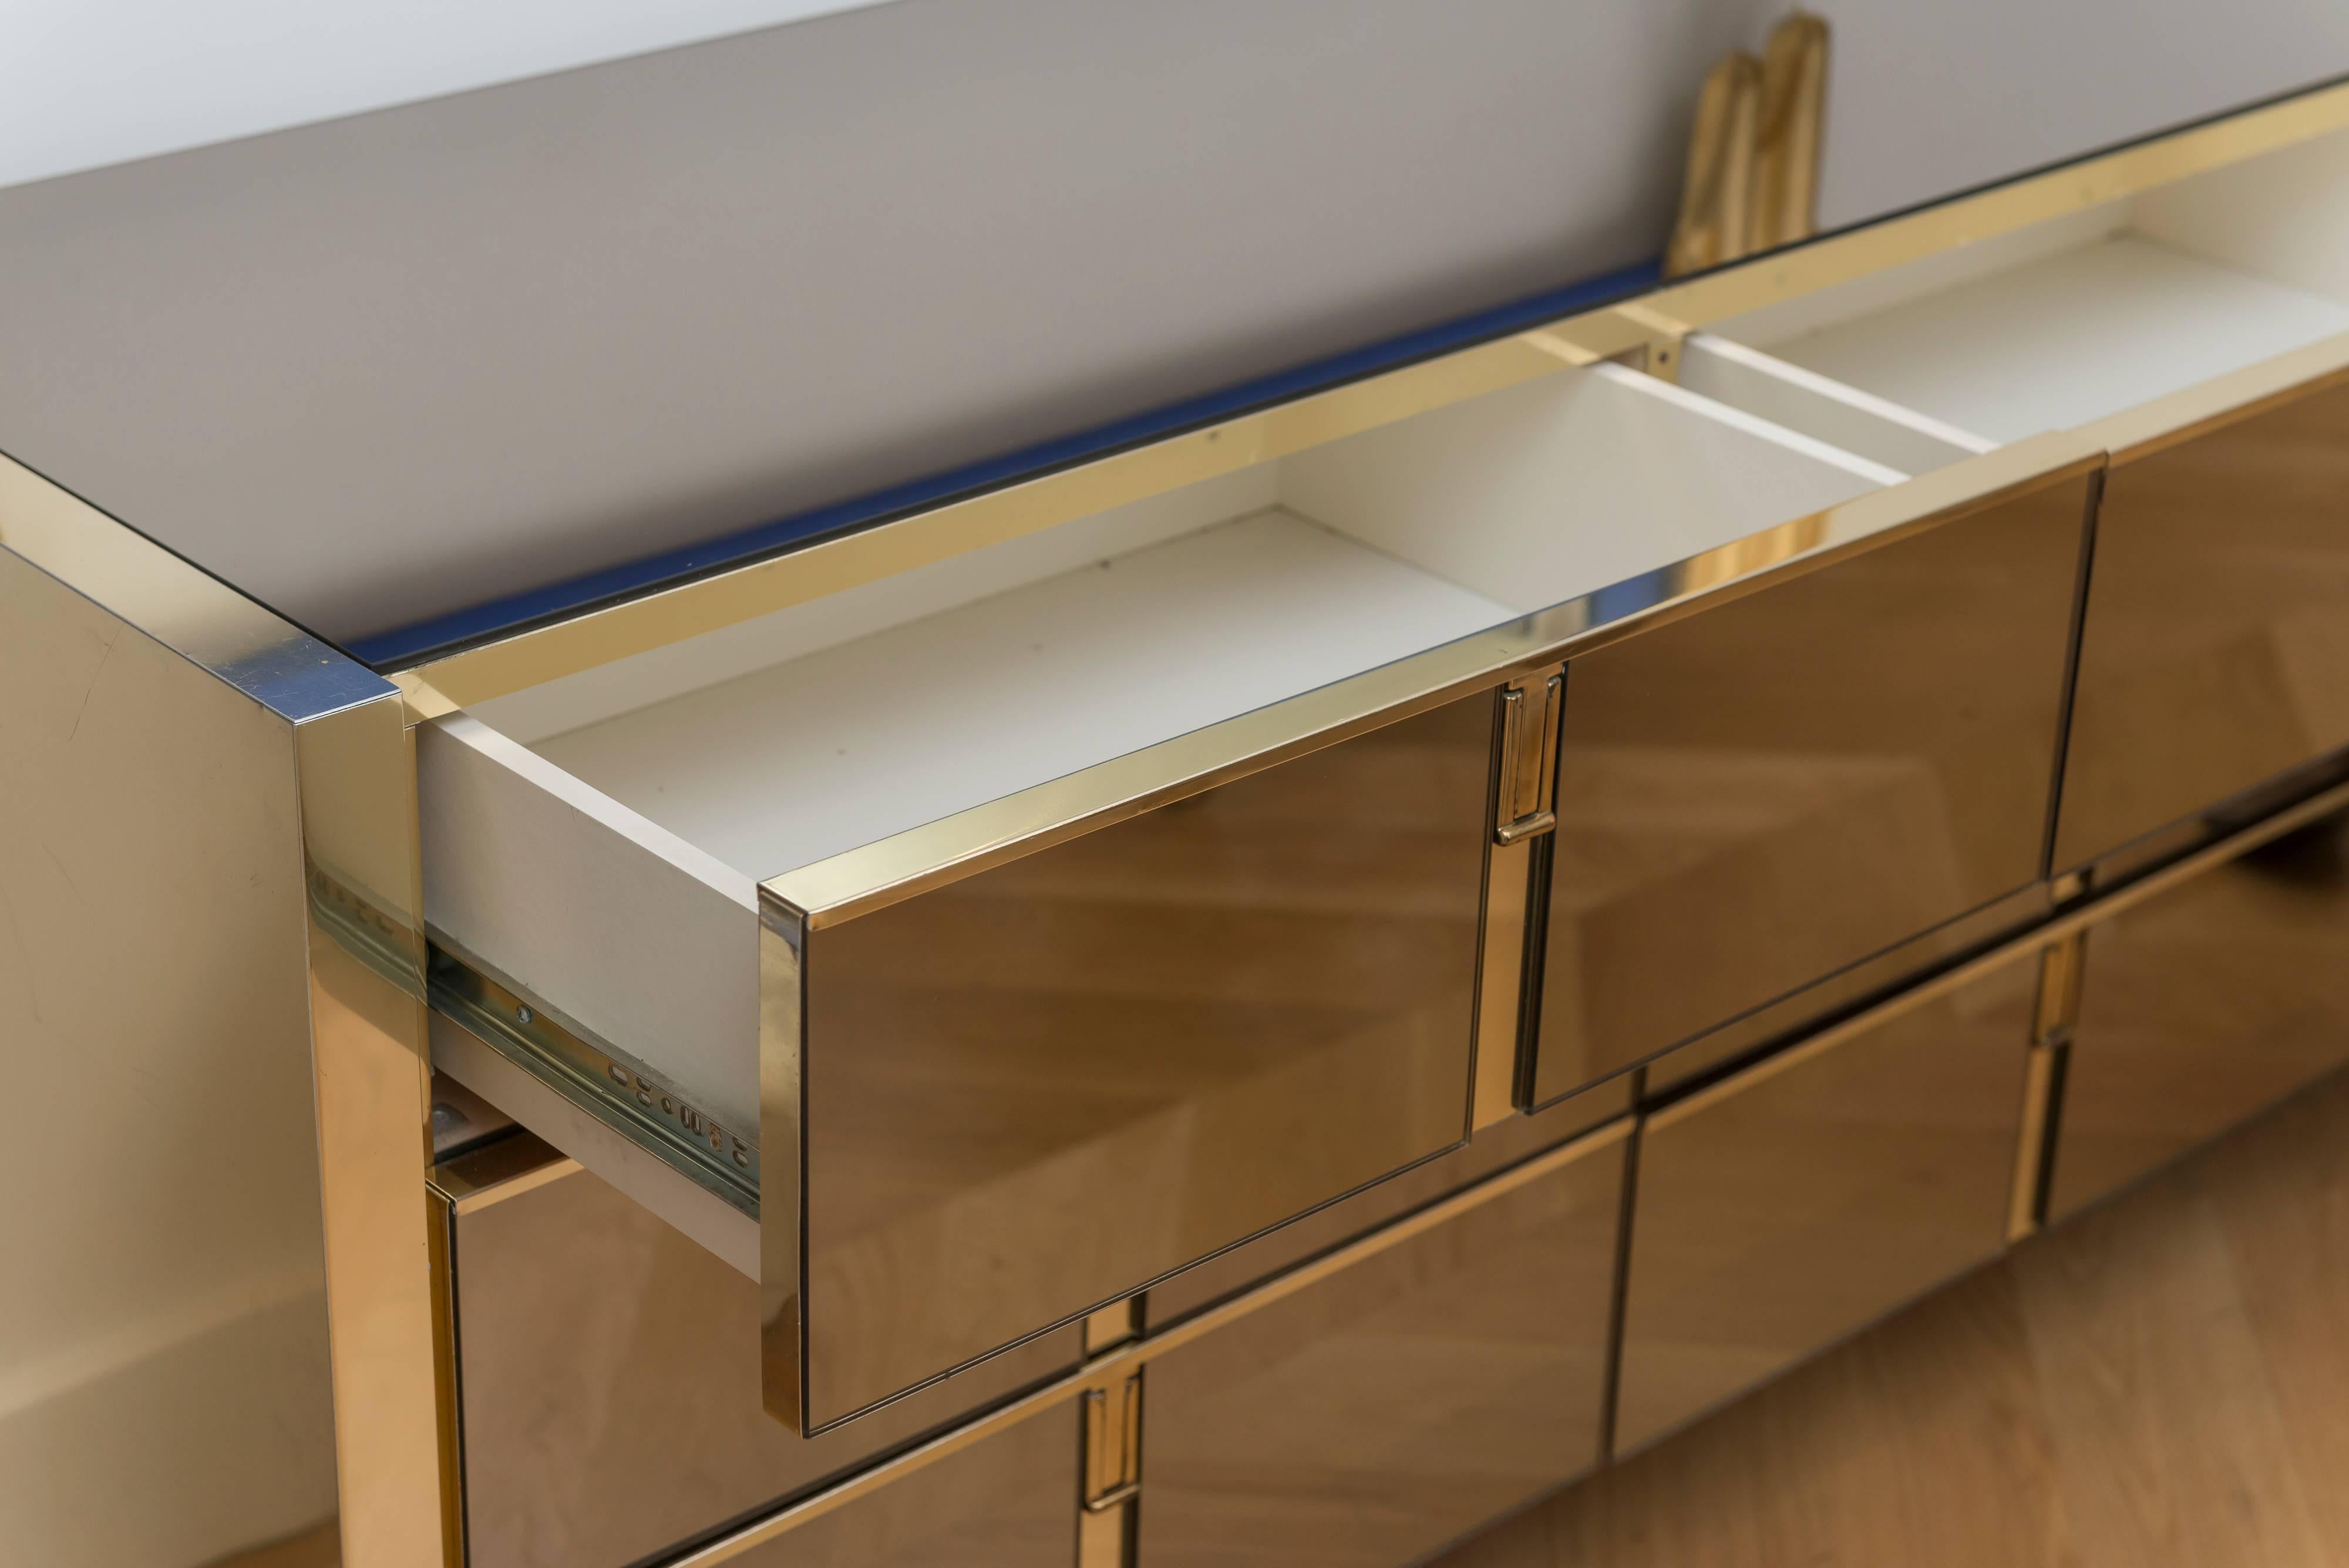 Ello Furniture Co Brass and Mirrored Brass Nine-Drawer Dresser In Excellent Condition For Sale In San Francisco, CA